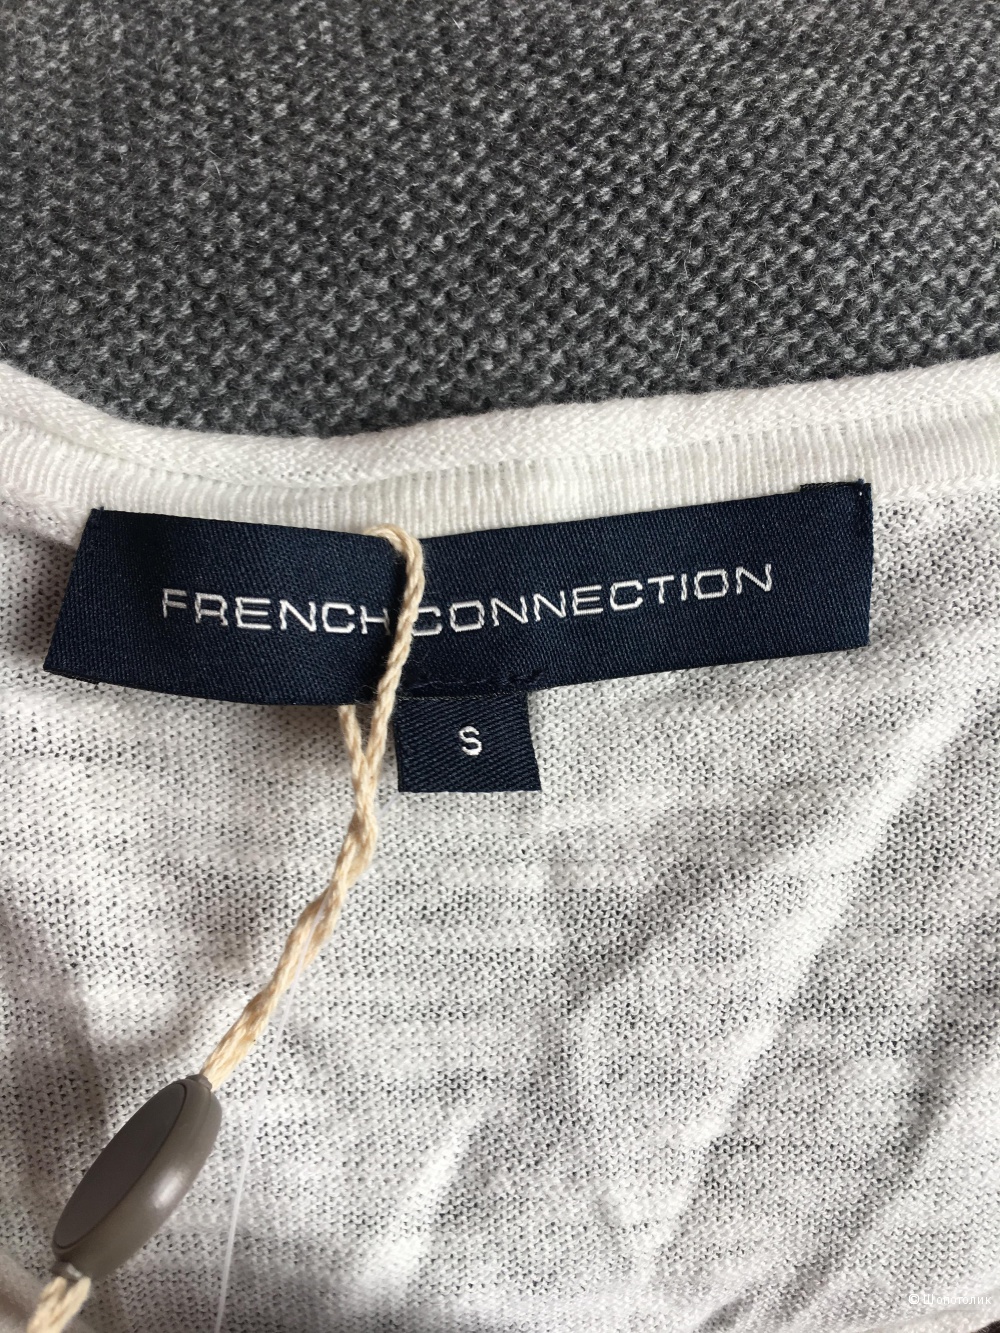 Топ French connection, S